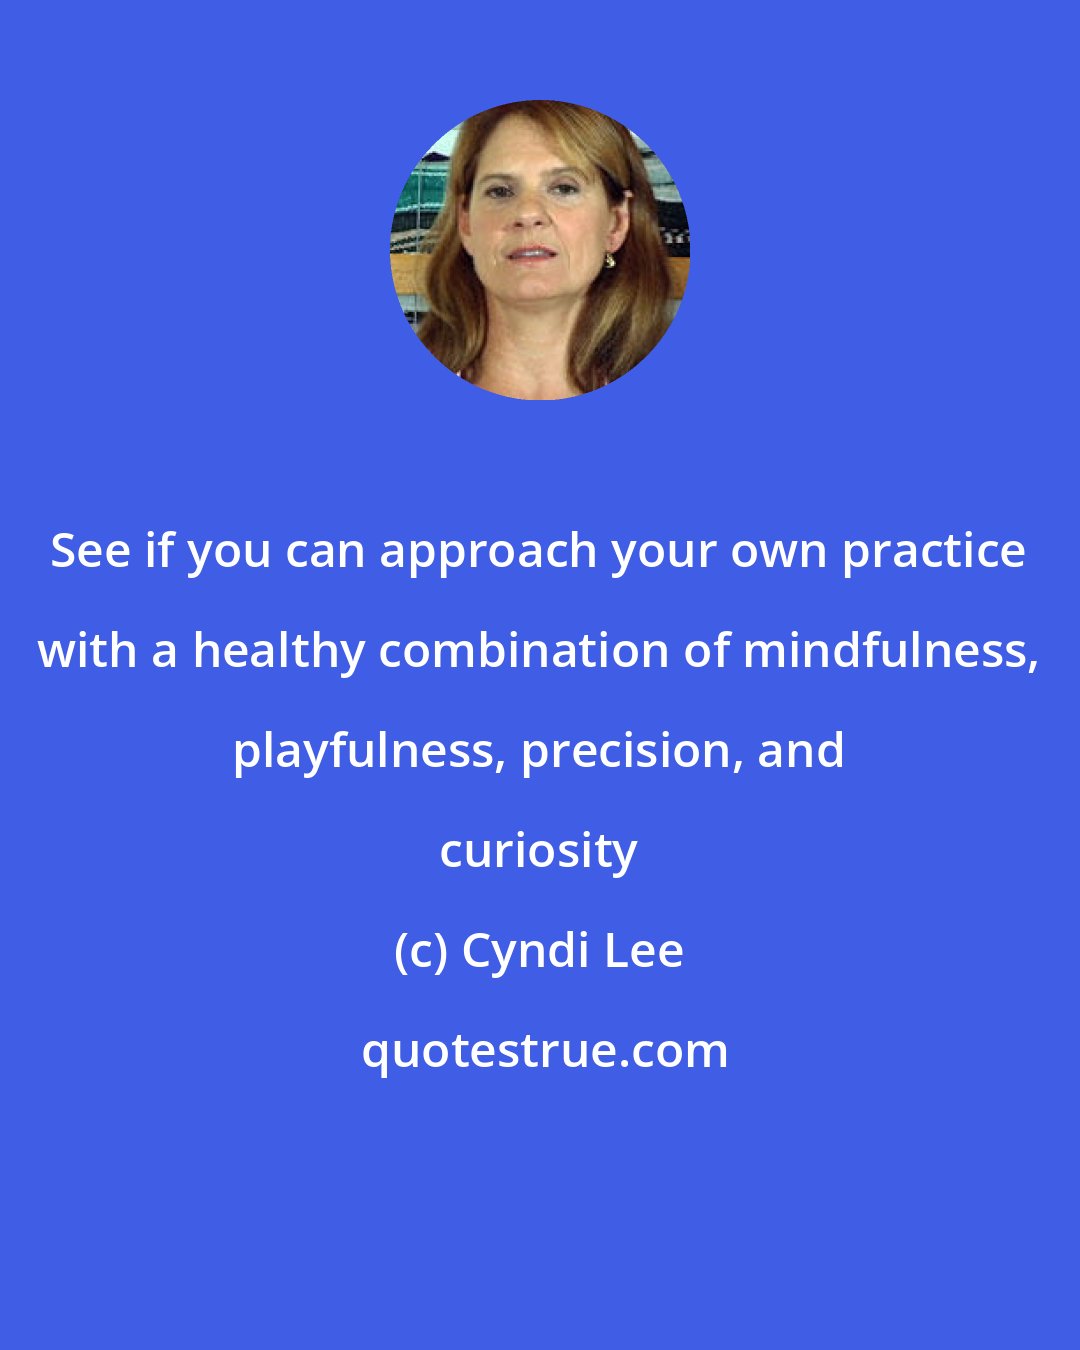 Cyndi Lee: See if you can approach your own practice with a healthy combination of mindfulness, playfulness, precision, and curiosity